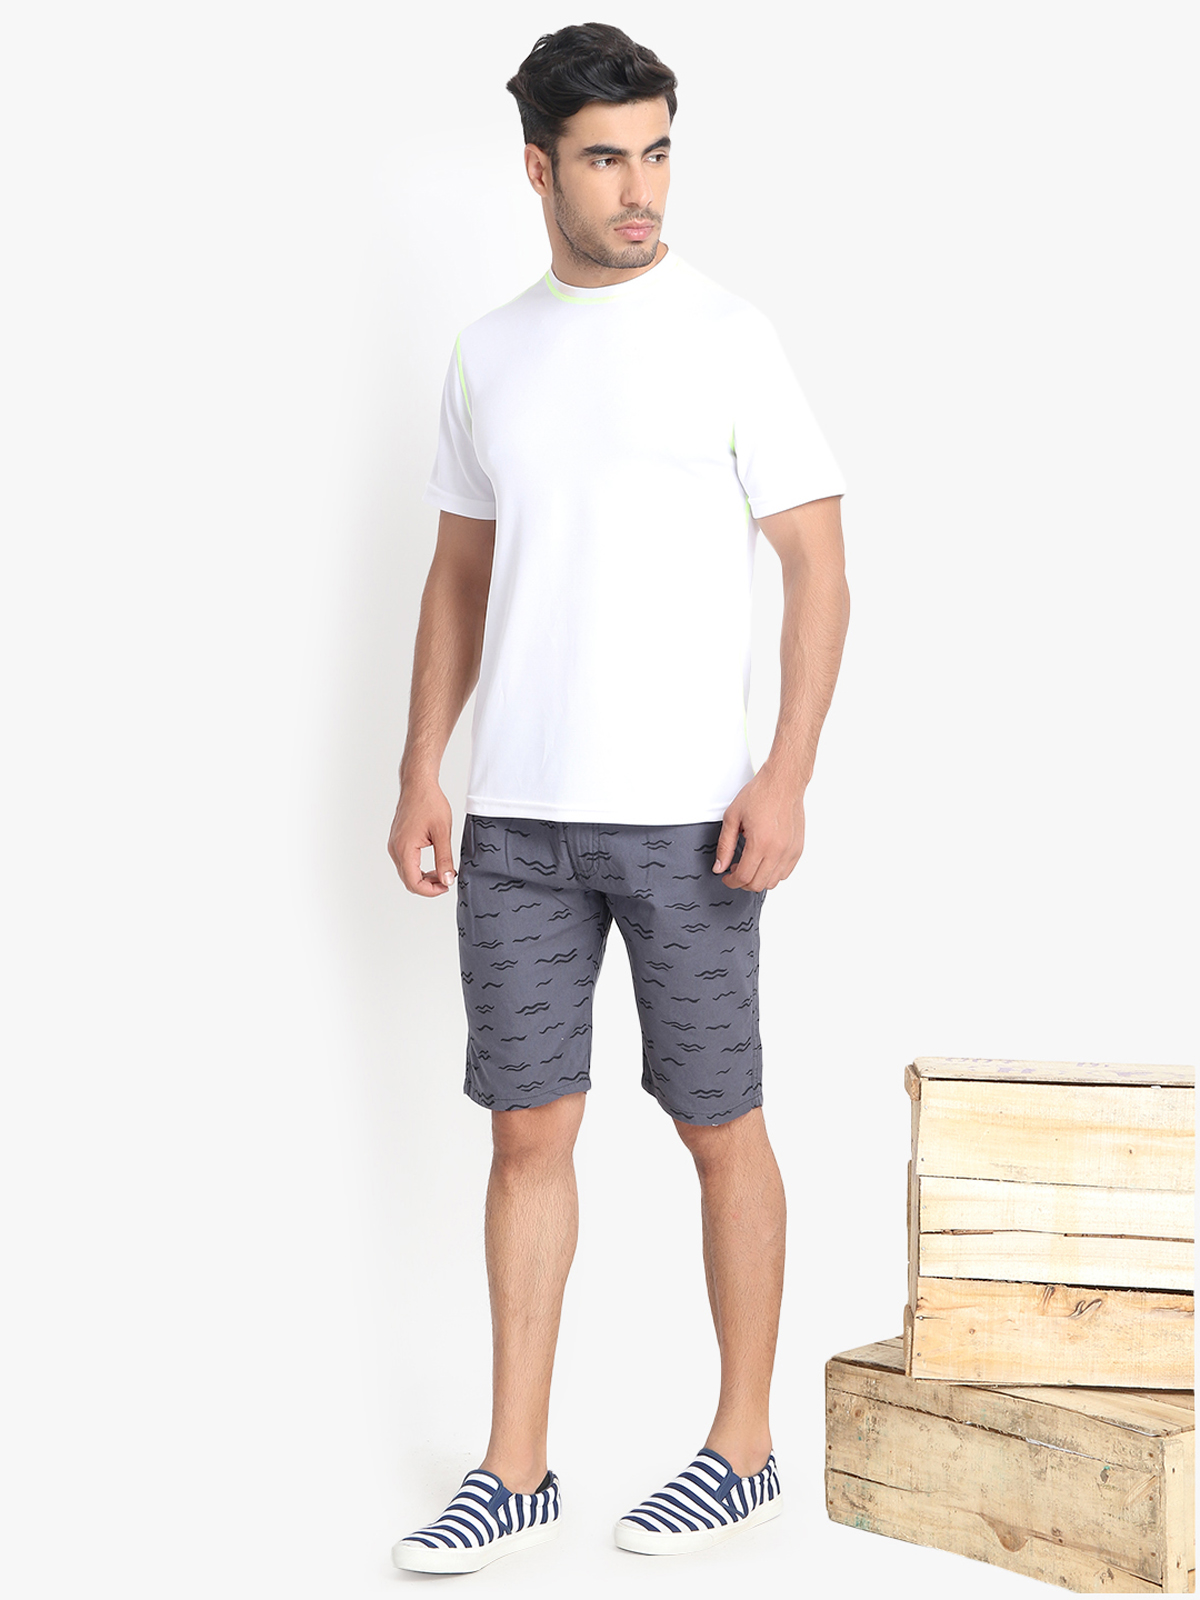 Buy Perfect Men's Cotton Reular Fit Shorts Online @ ₹499 from ShopClues